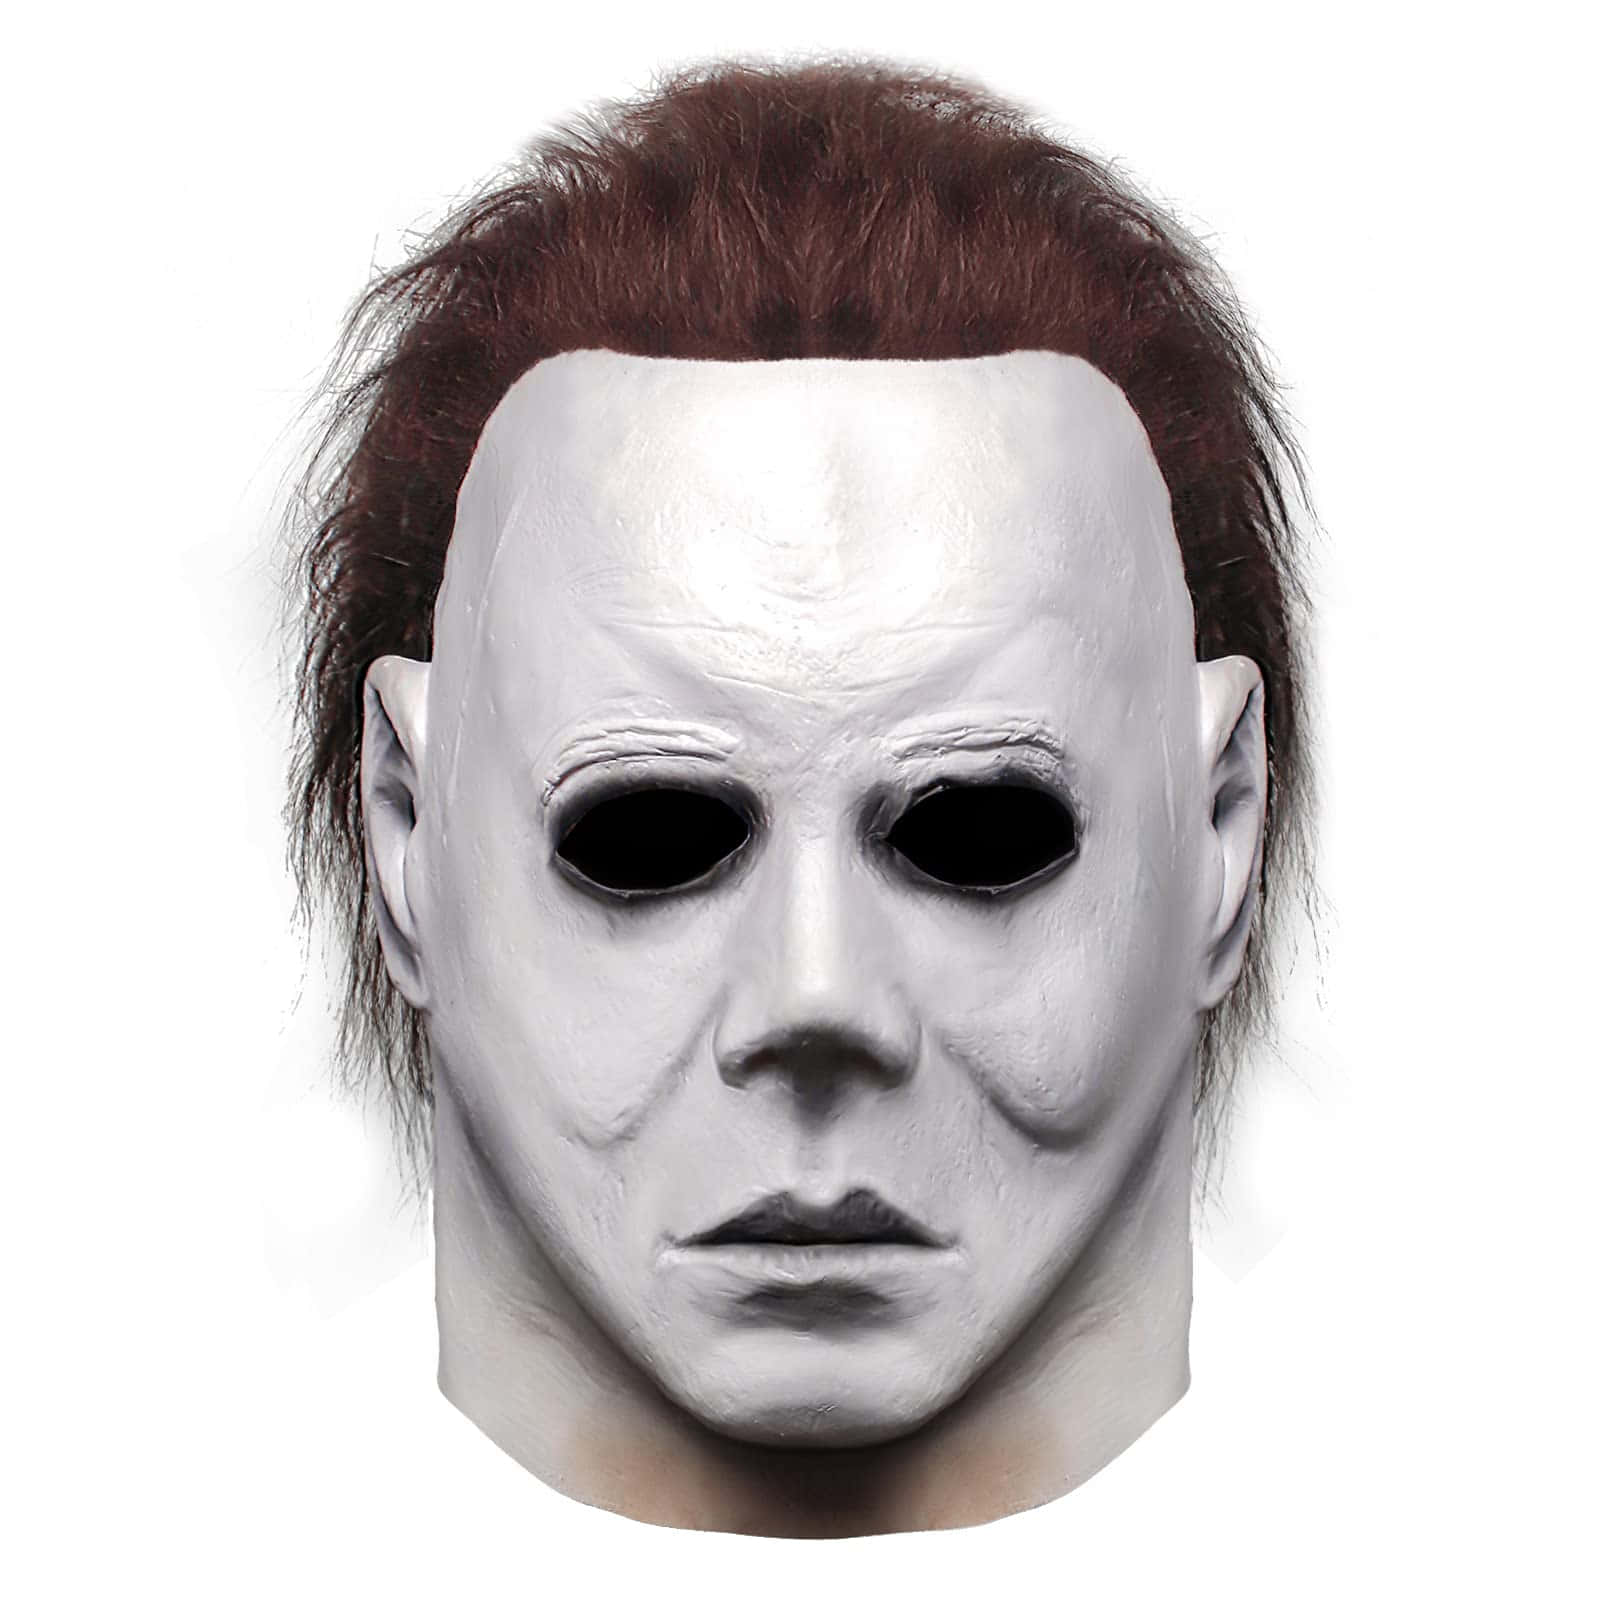 Michael Myers, the ominous figure from slasher film series Halloween